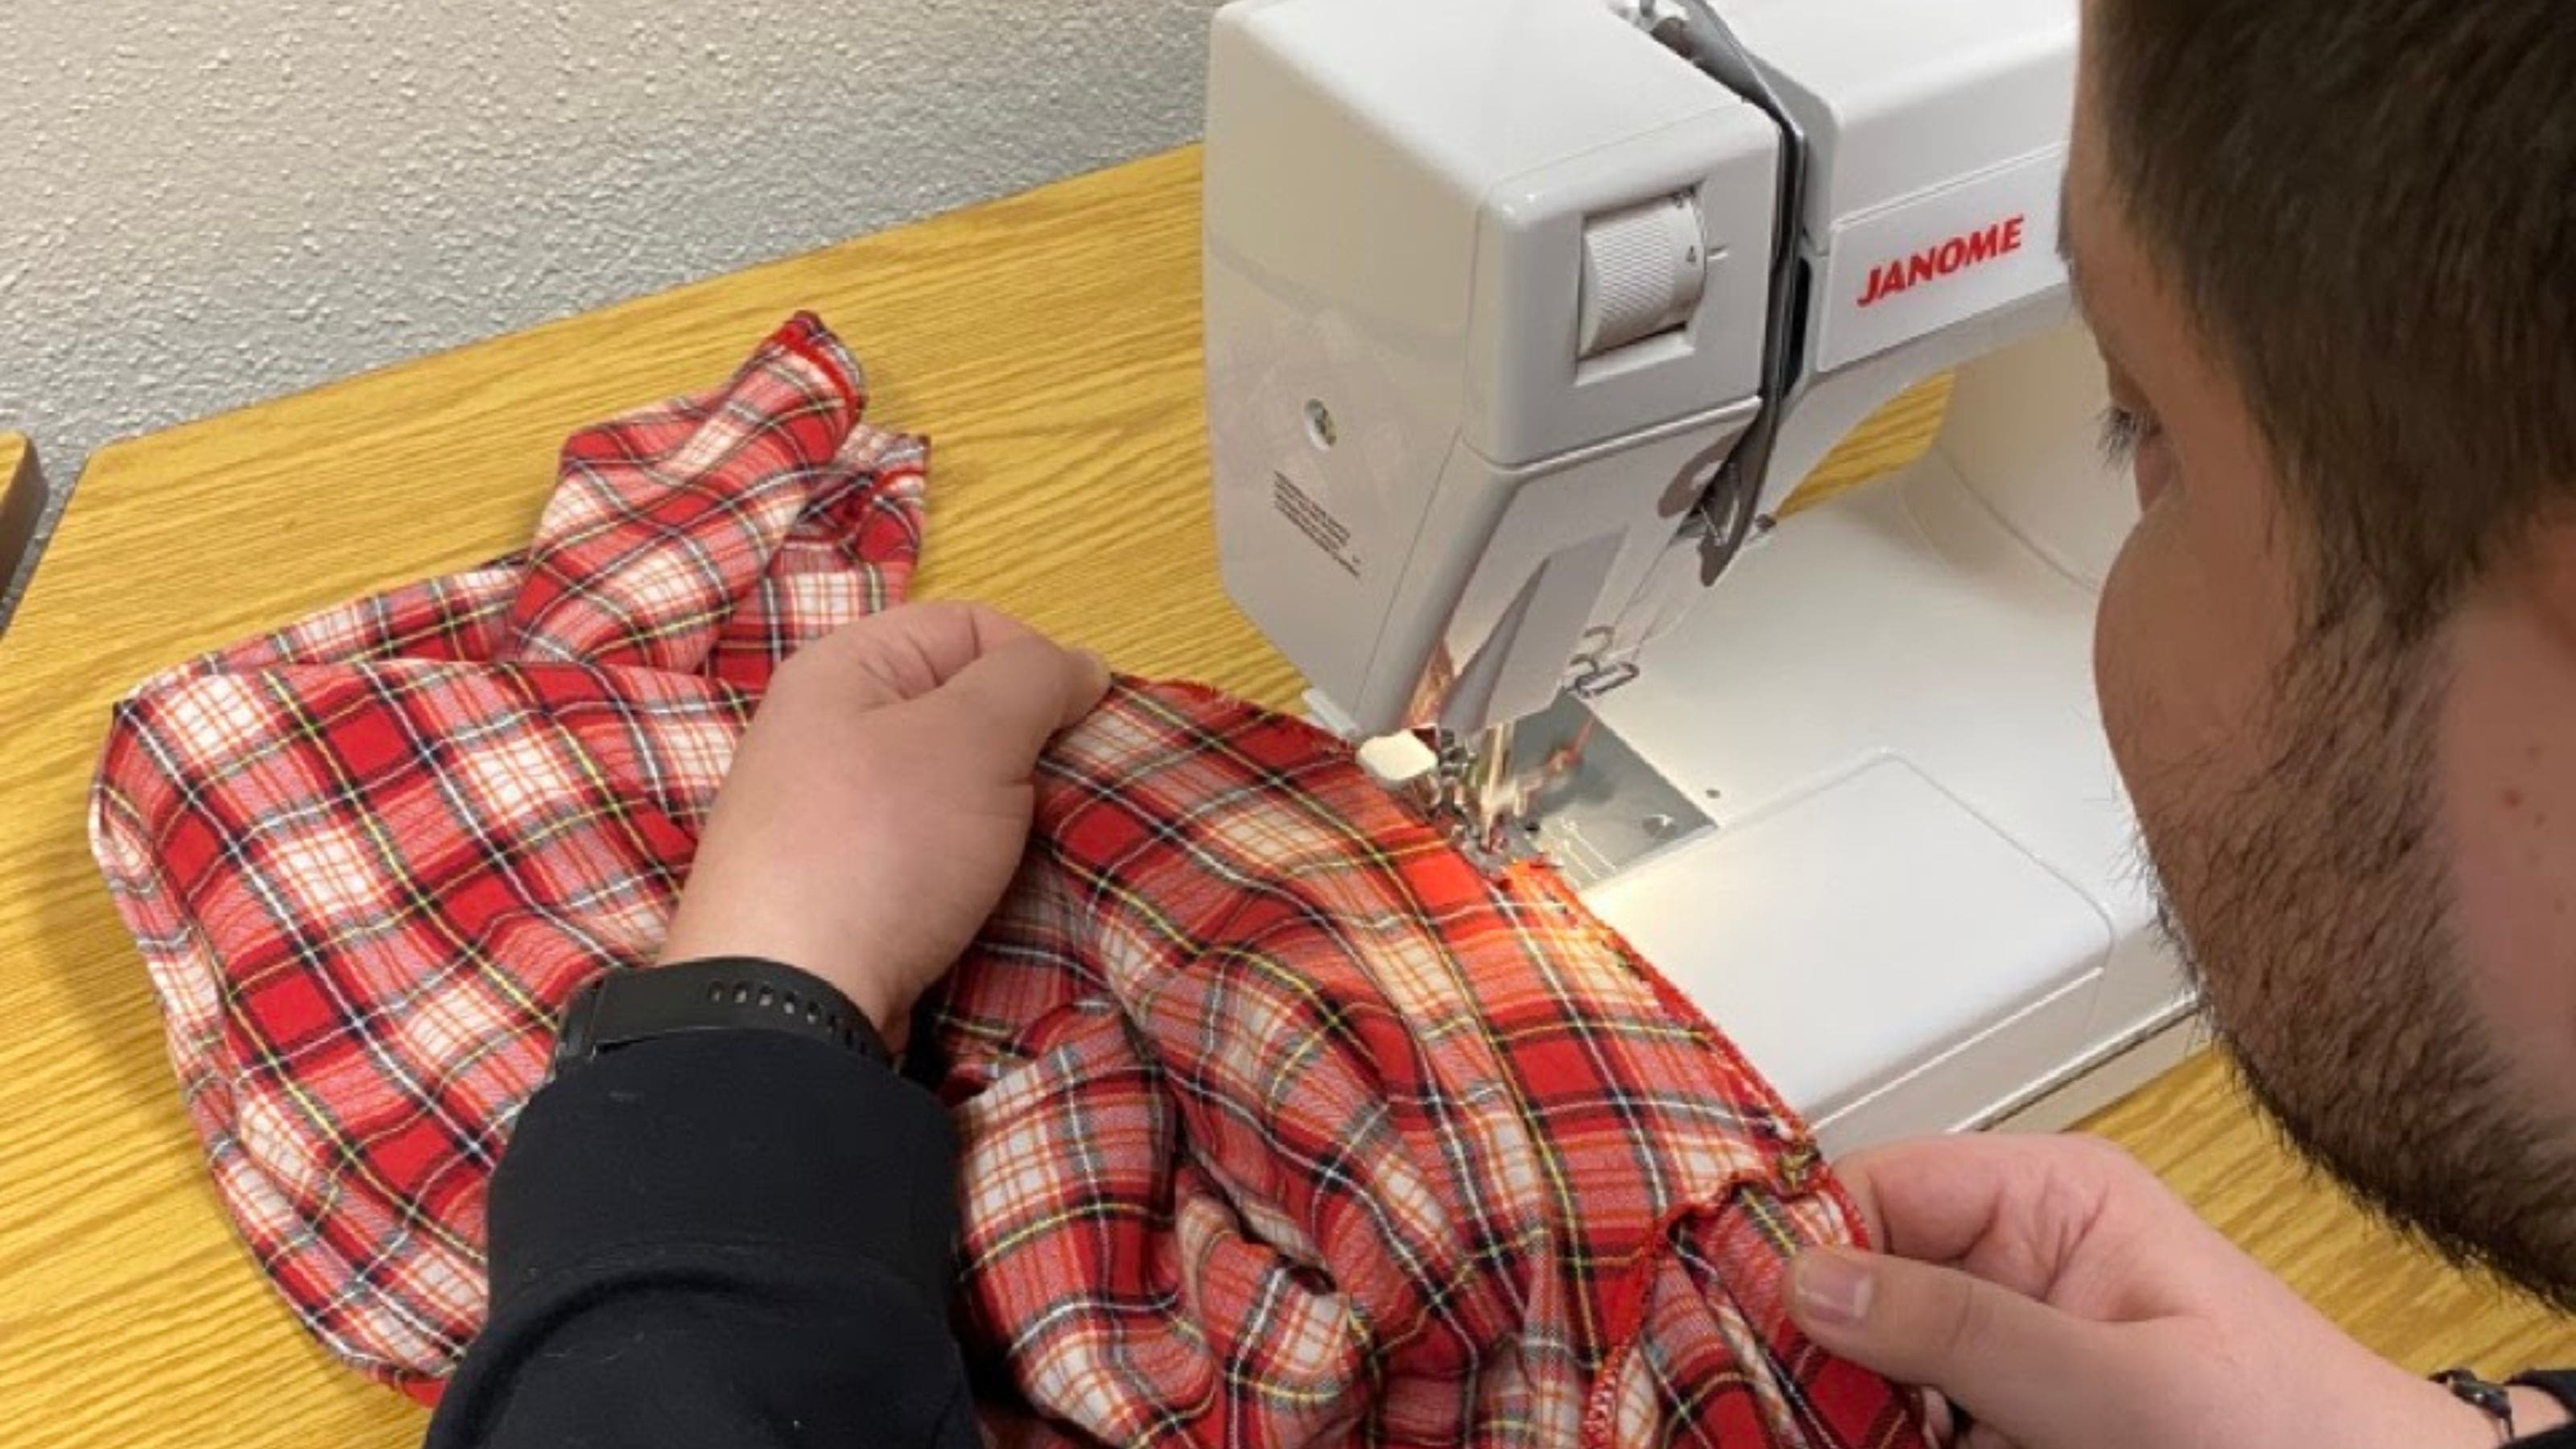 U of A community member using a sewing machine at the Repair Cafe